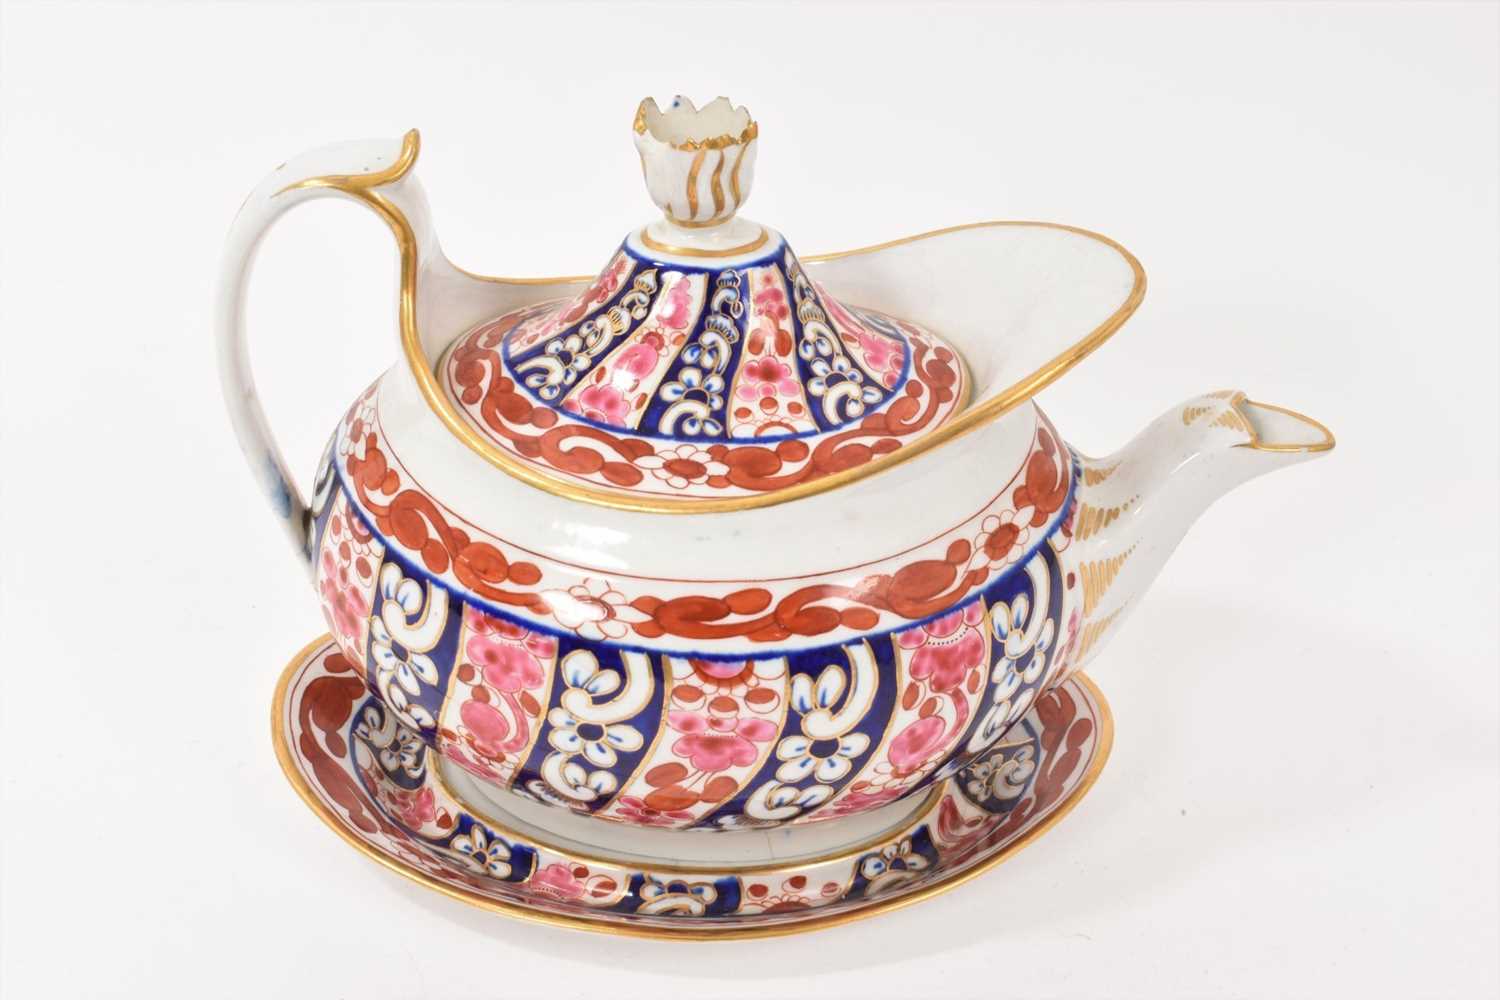 Worcester Queen Charlotte pattern teapot, cover and stand (teapot cracked) - Image 2 of 6